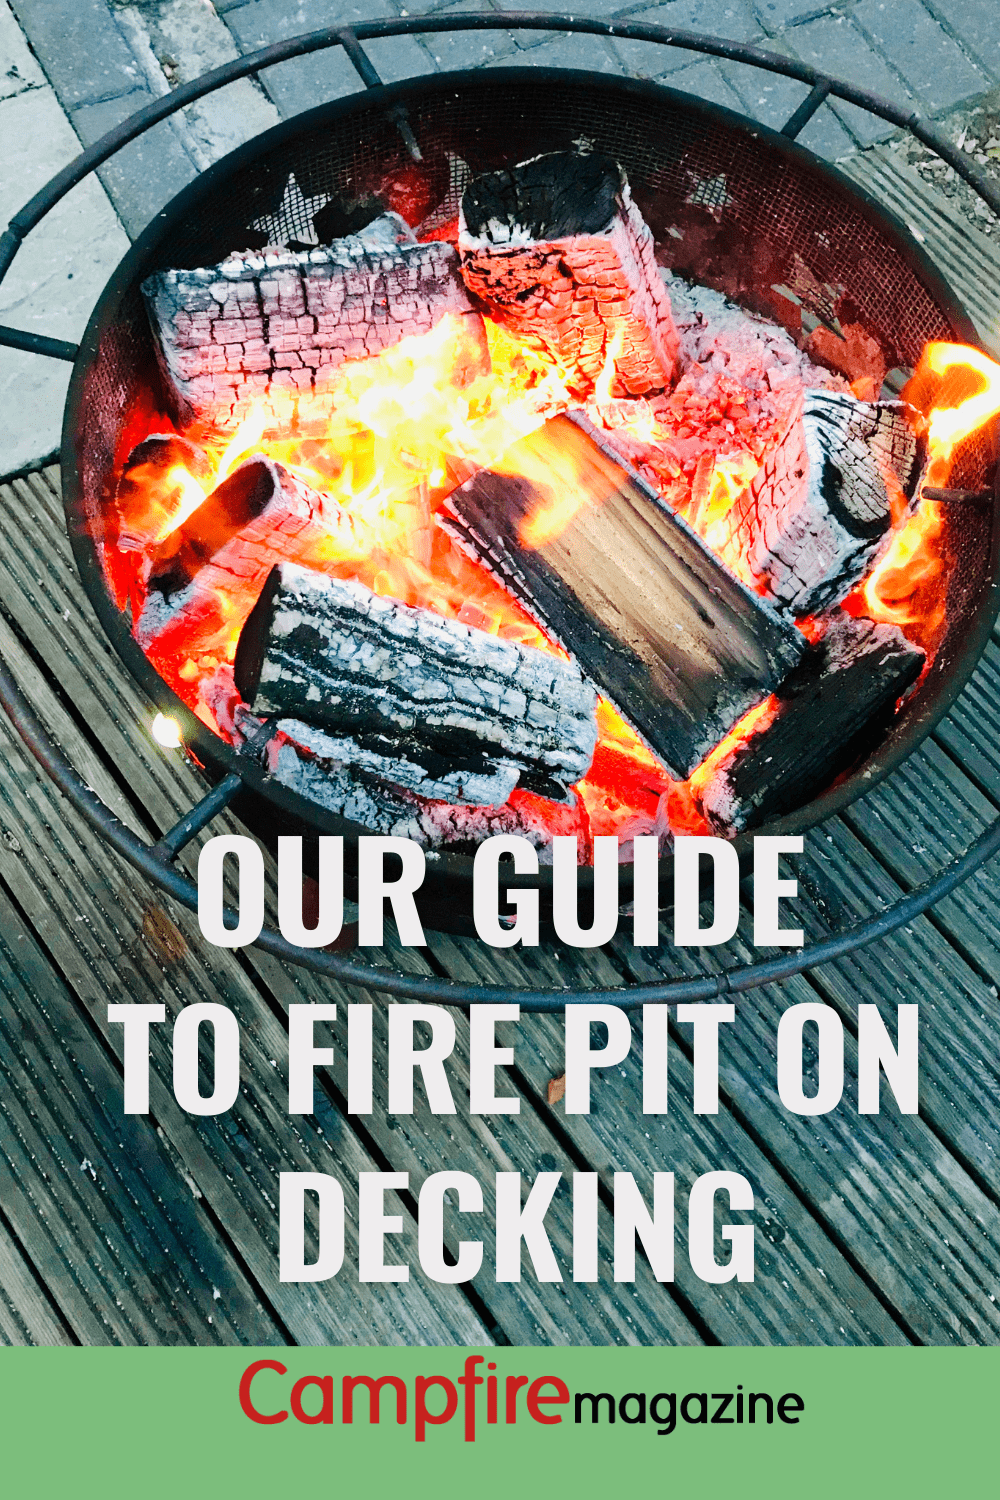 Our Guide To Have A Fire Pit On Decking | Campfire Magazine